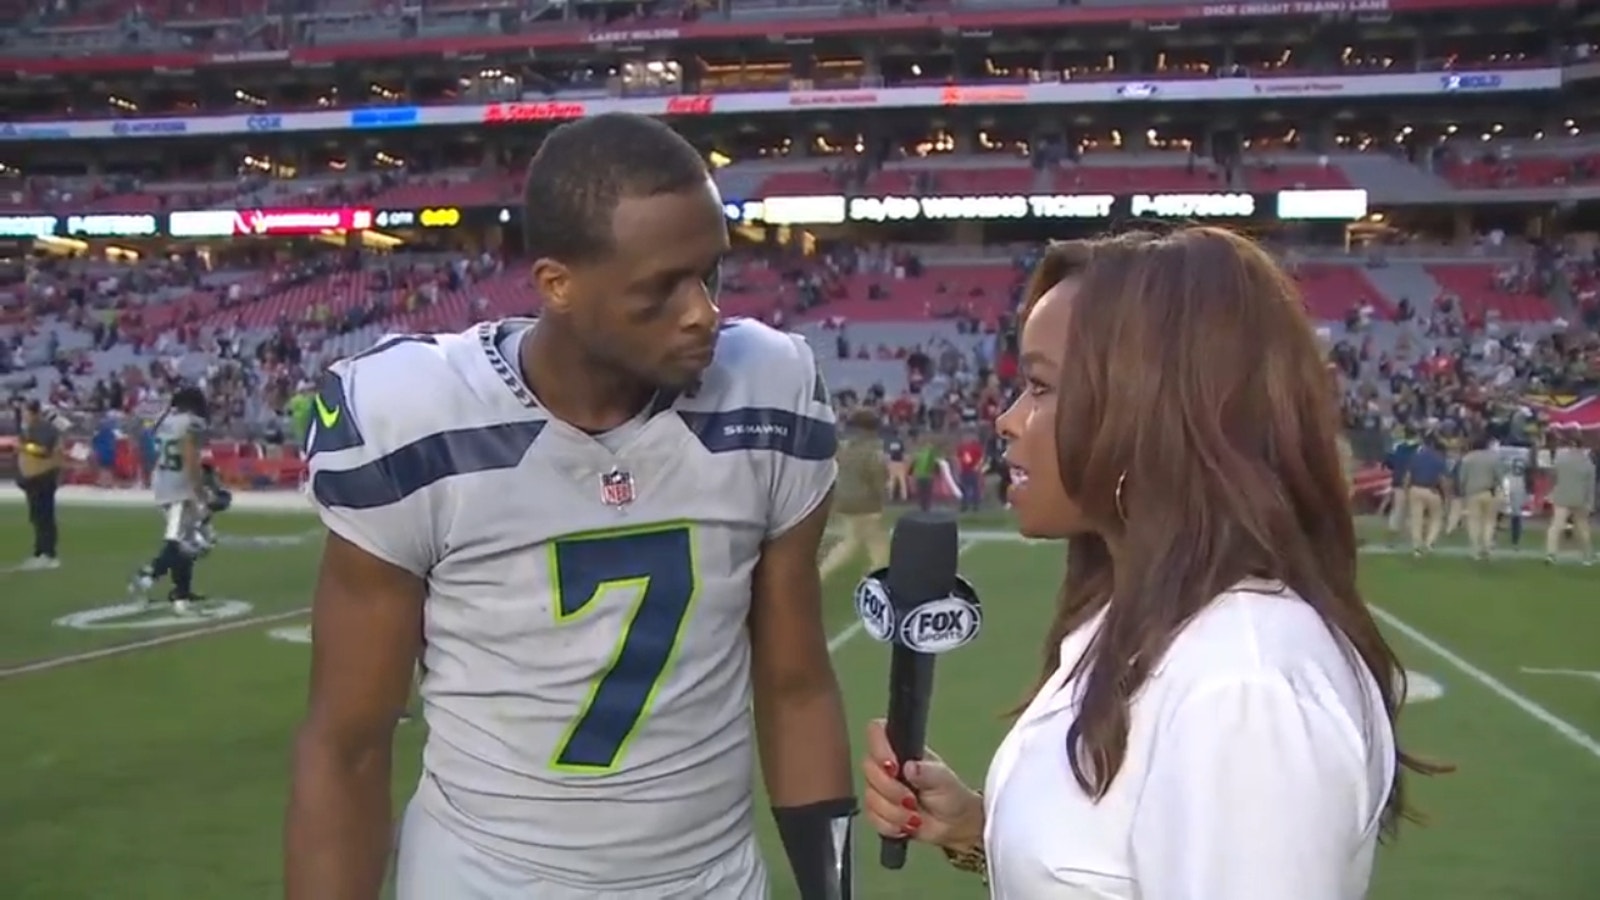 Geno Smith on how the Seahawks continued to fight for victory over the Cardinals